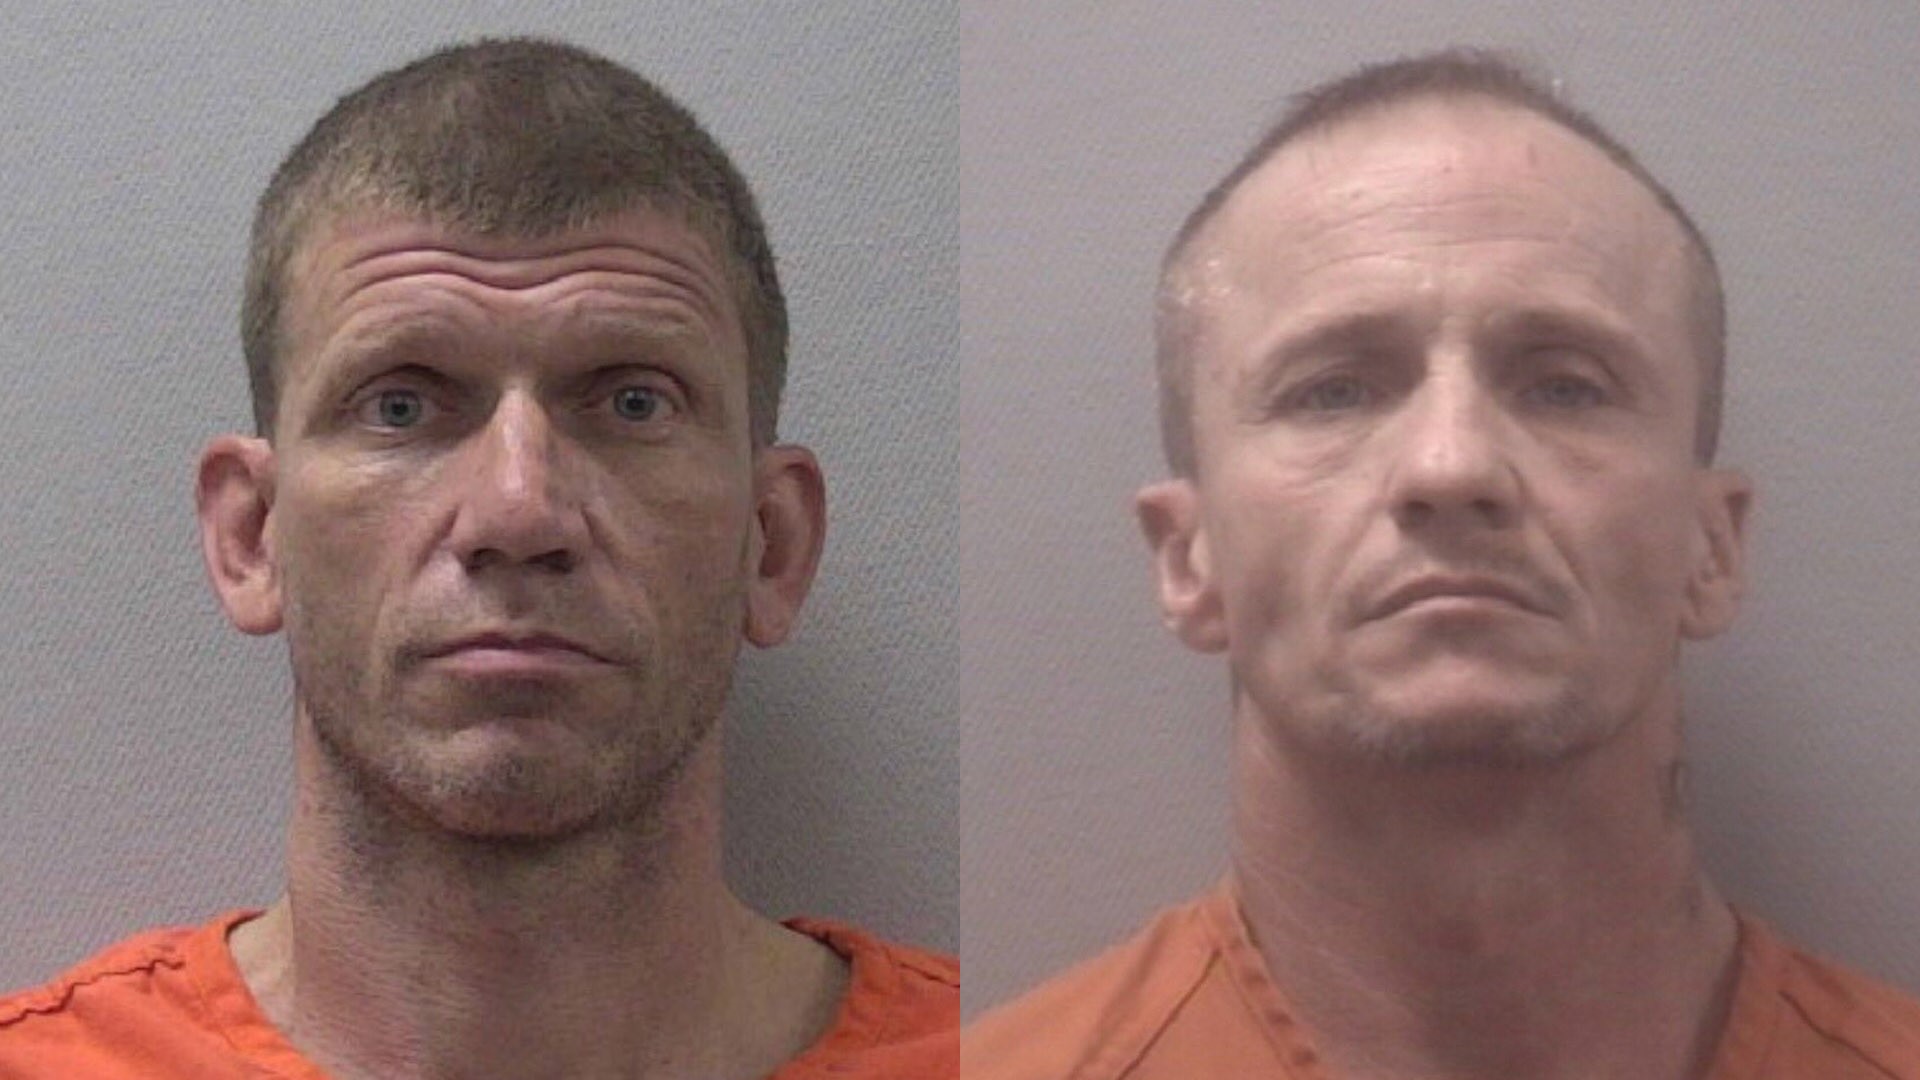 Columbia police have arrested two men in connection with the arson at the Walmart store on Harbison Boulevard earlier this week.